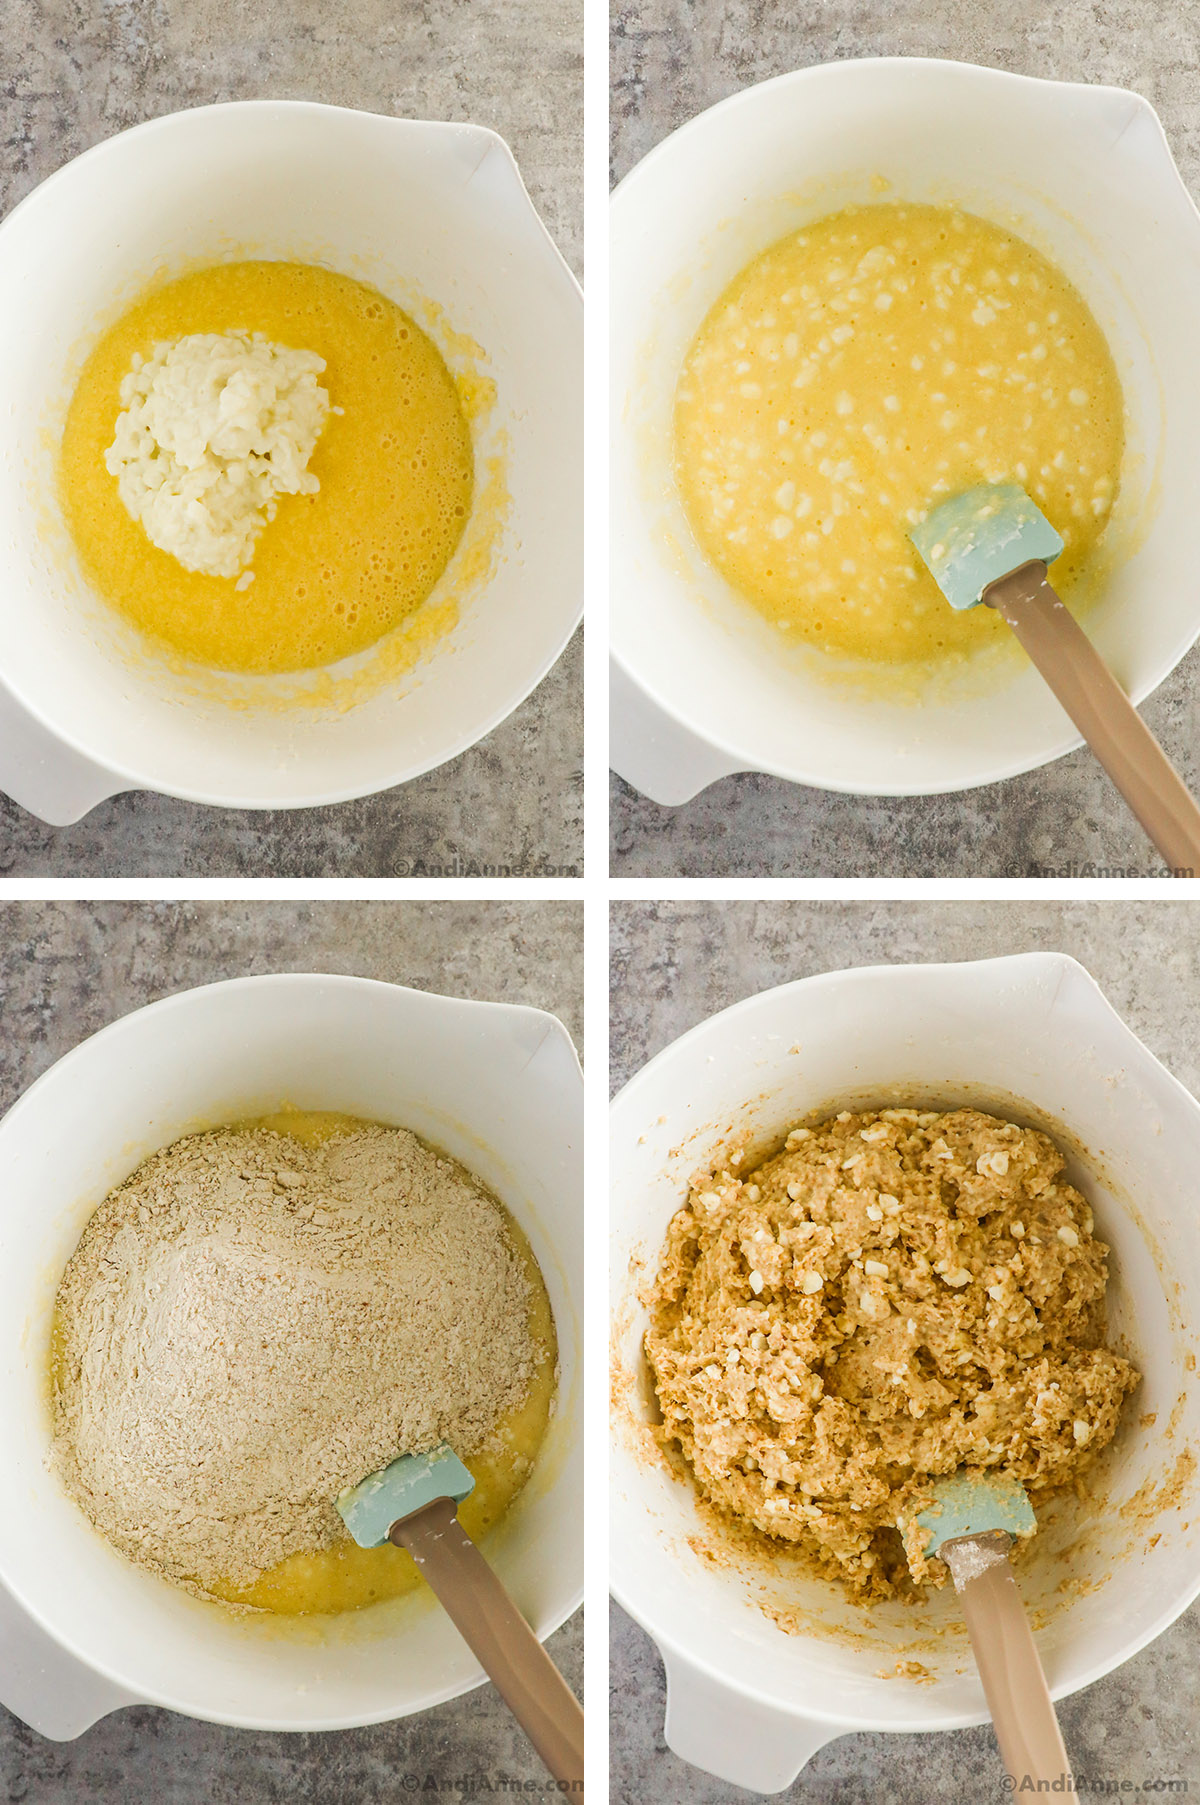 Four images, first is yellow liquid with cottage cheese dumped on top. Second is cottage cheese mixed in. Third is dry ingredients dumped over top. Fourth is all ingredients mixed together.